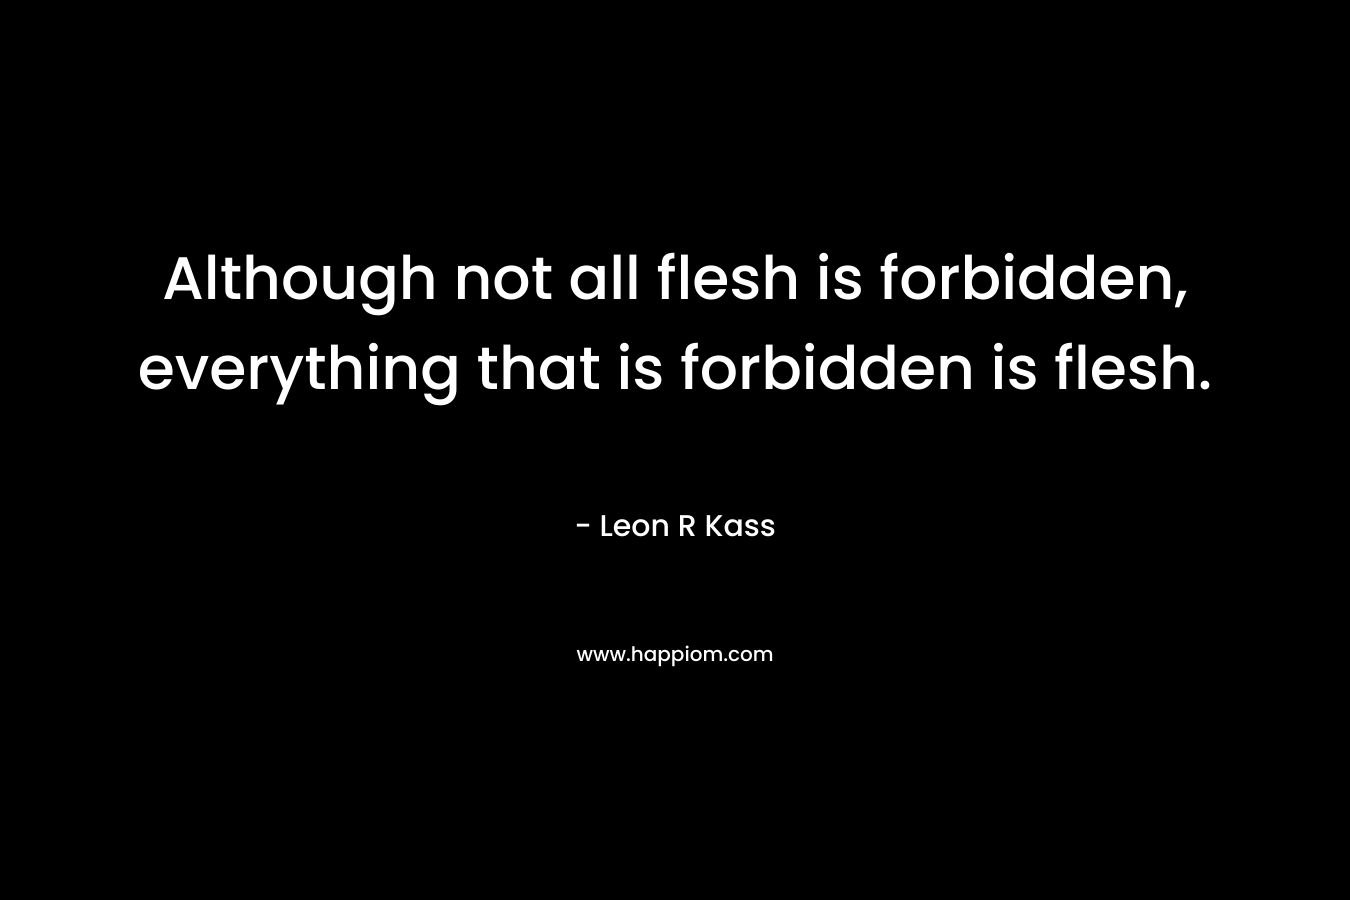 Although not all flesh is forbidden, everything that is forbidden is flesh.